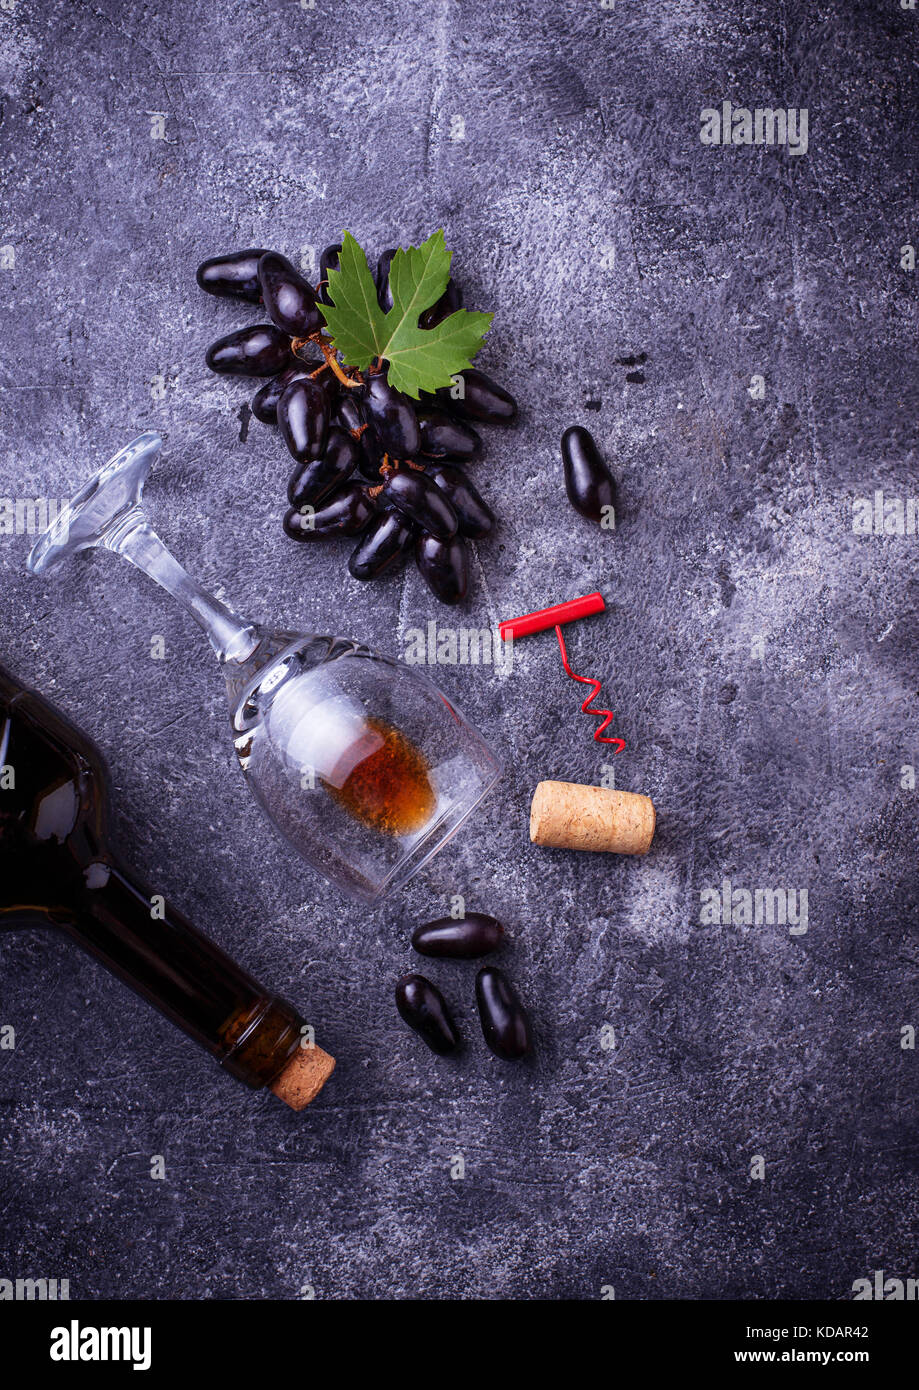 Grapes, red wine, glass, corkscrews and cork Stock Photo